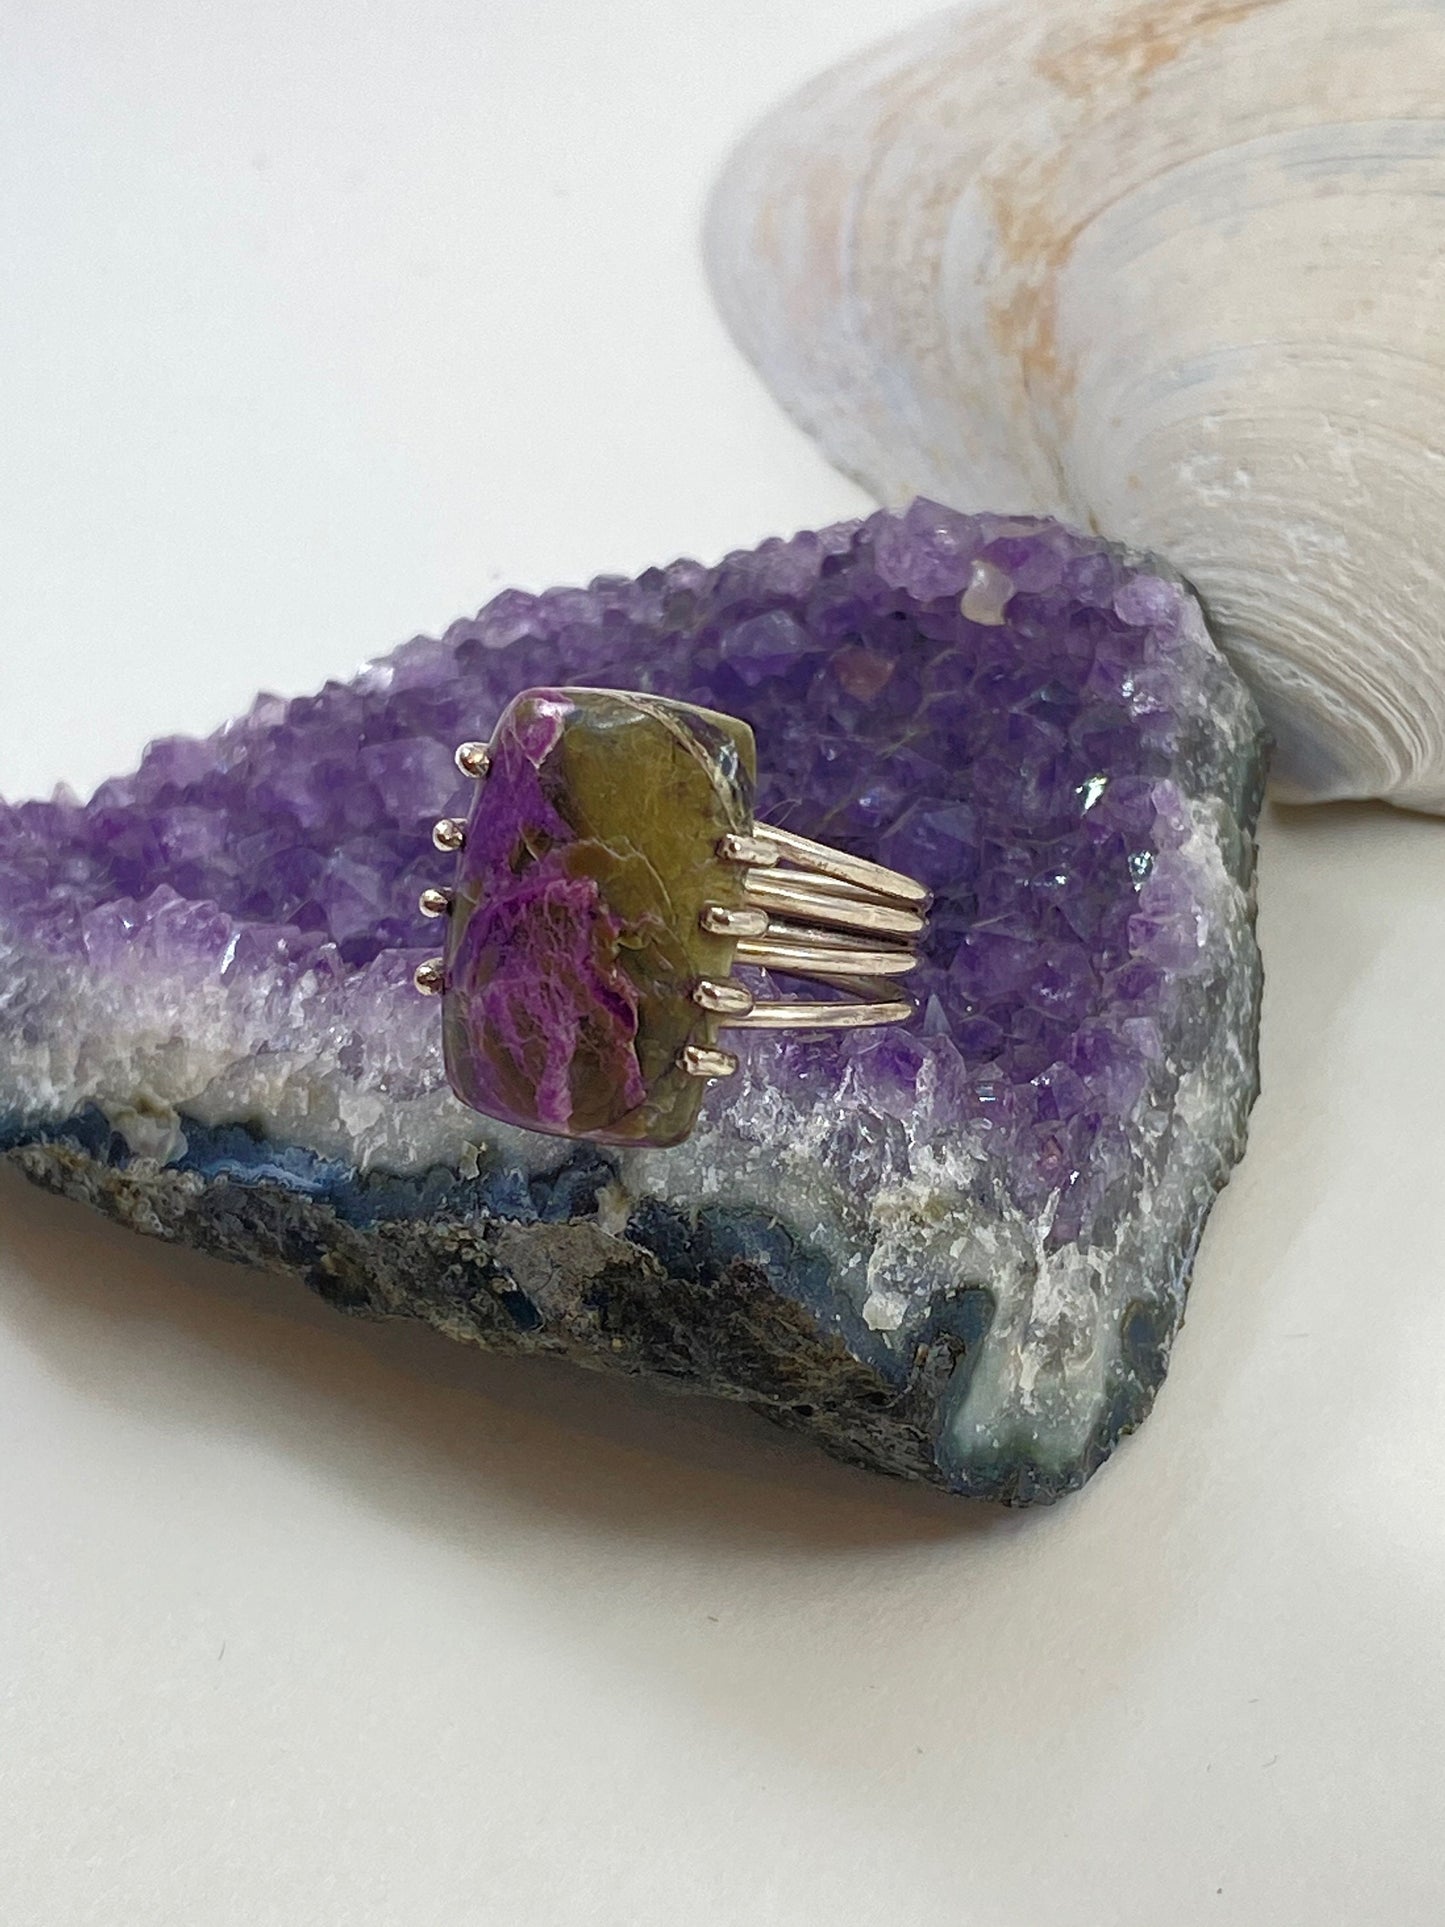 Gorgeous handmade Purperite stone sterling silver ring. This beautiful rectangle cut stone is a size 6 1/2 stunning ring.